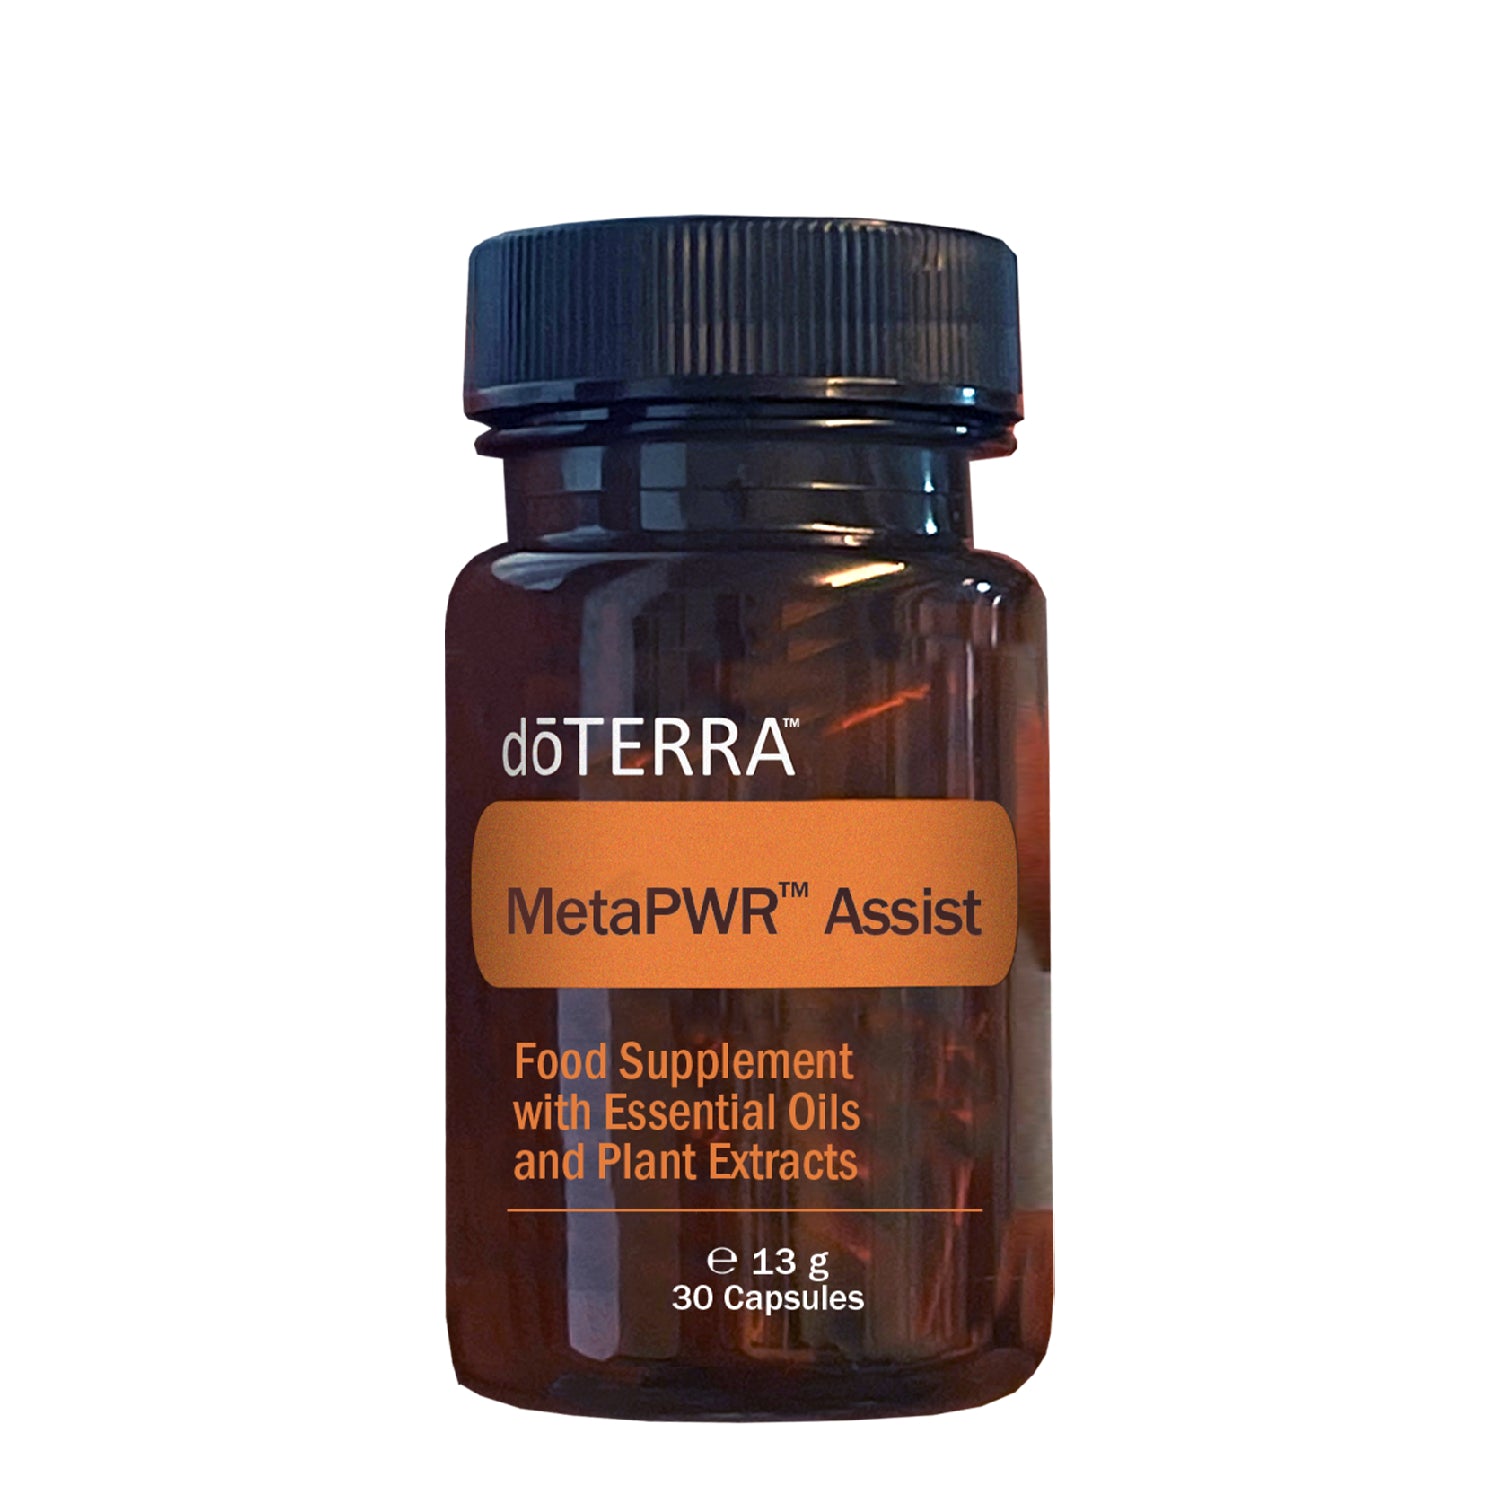 MetaPWR Assist